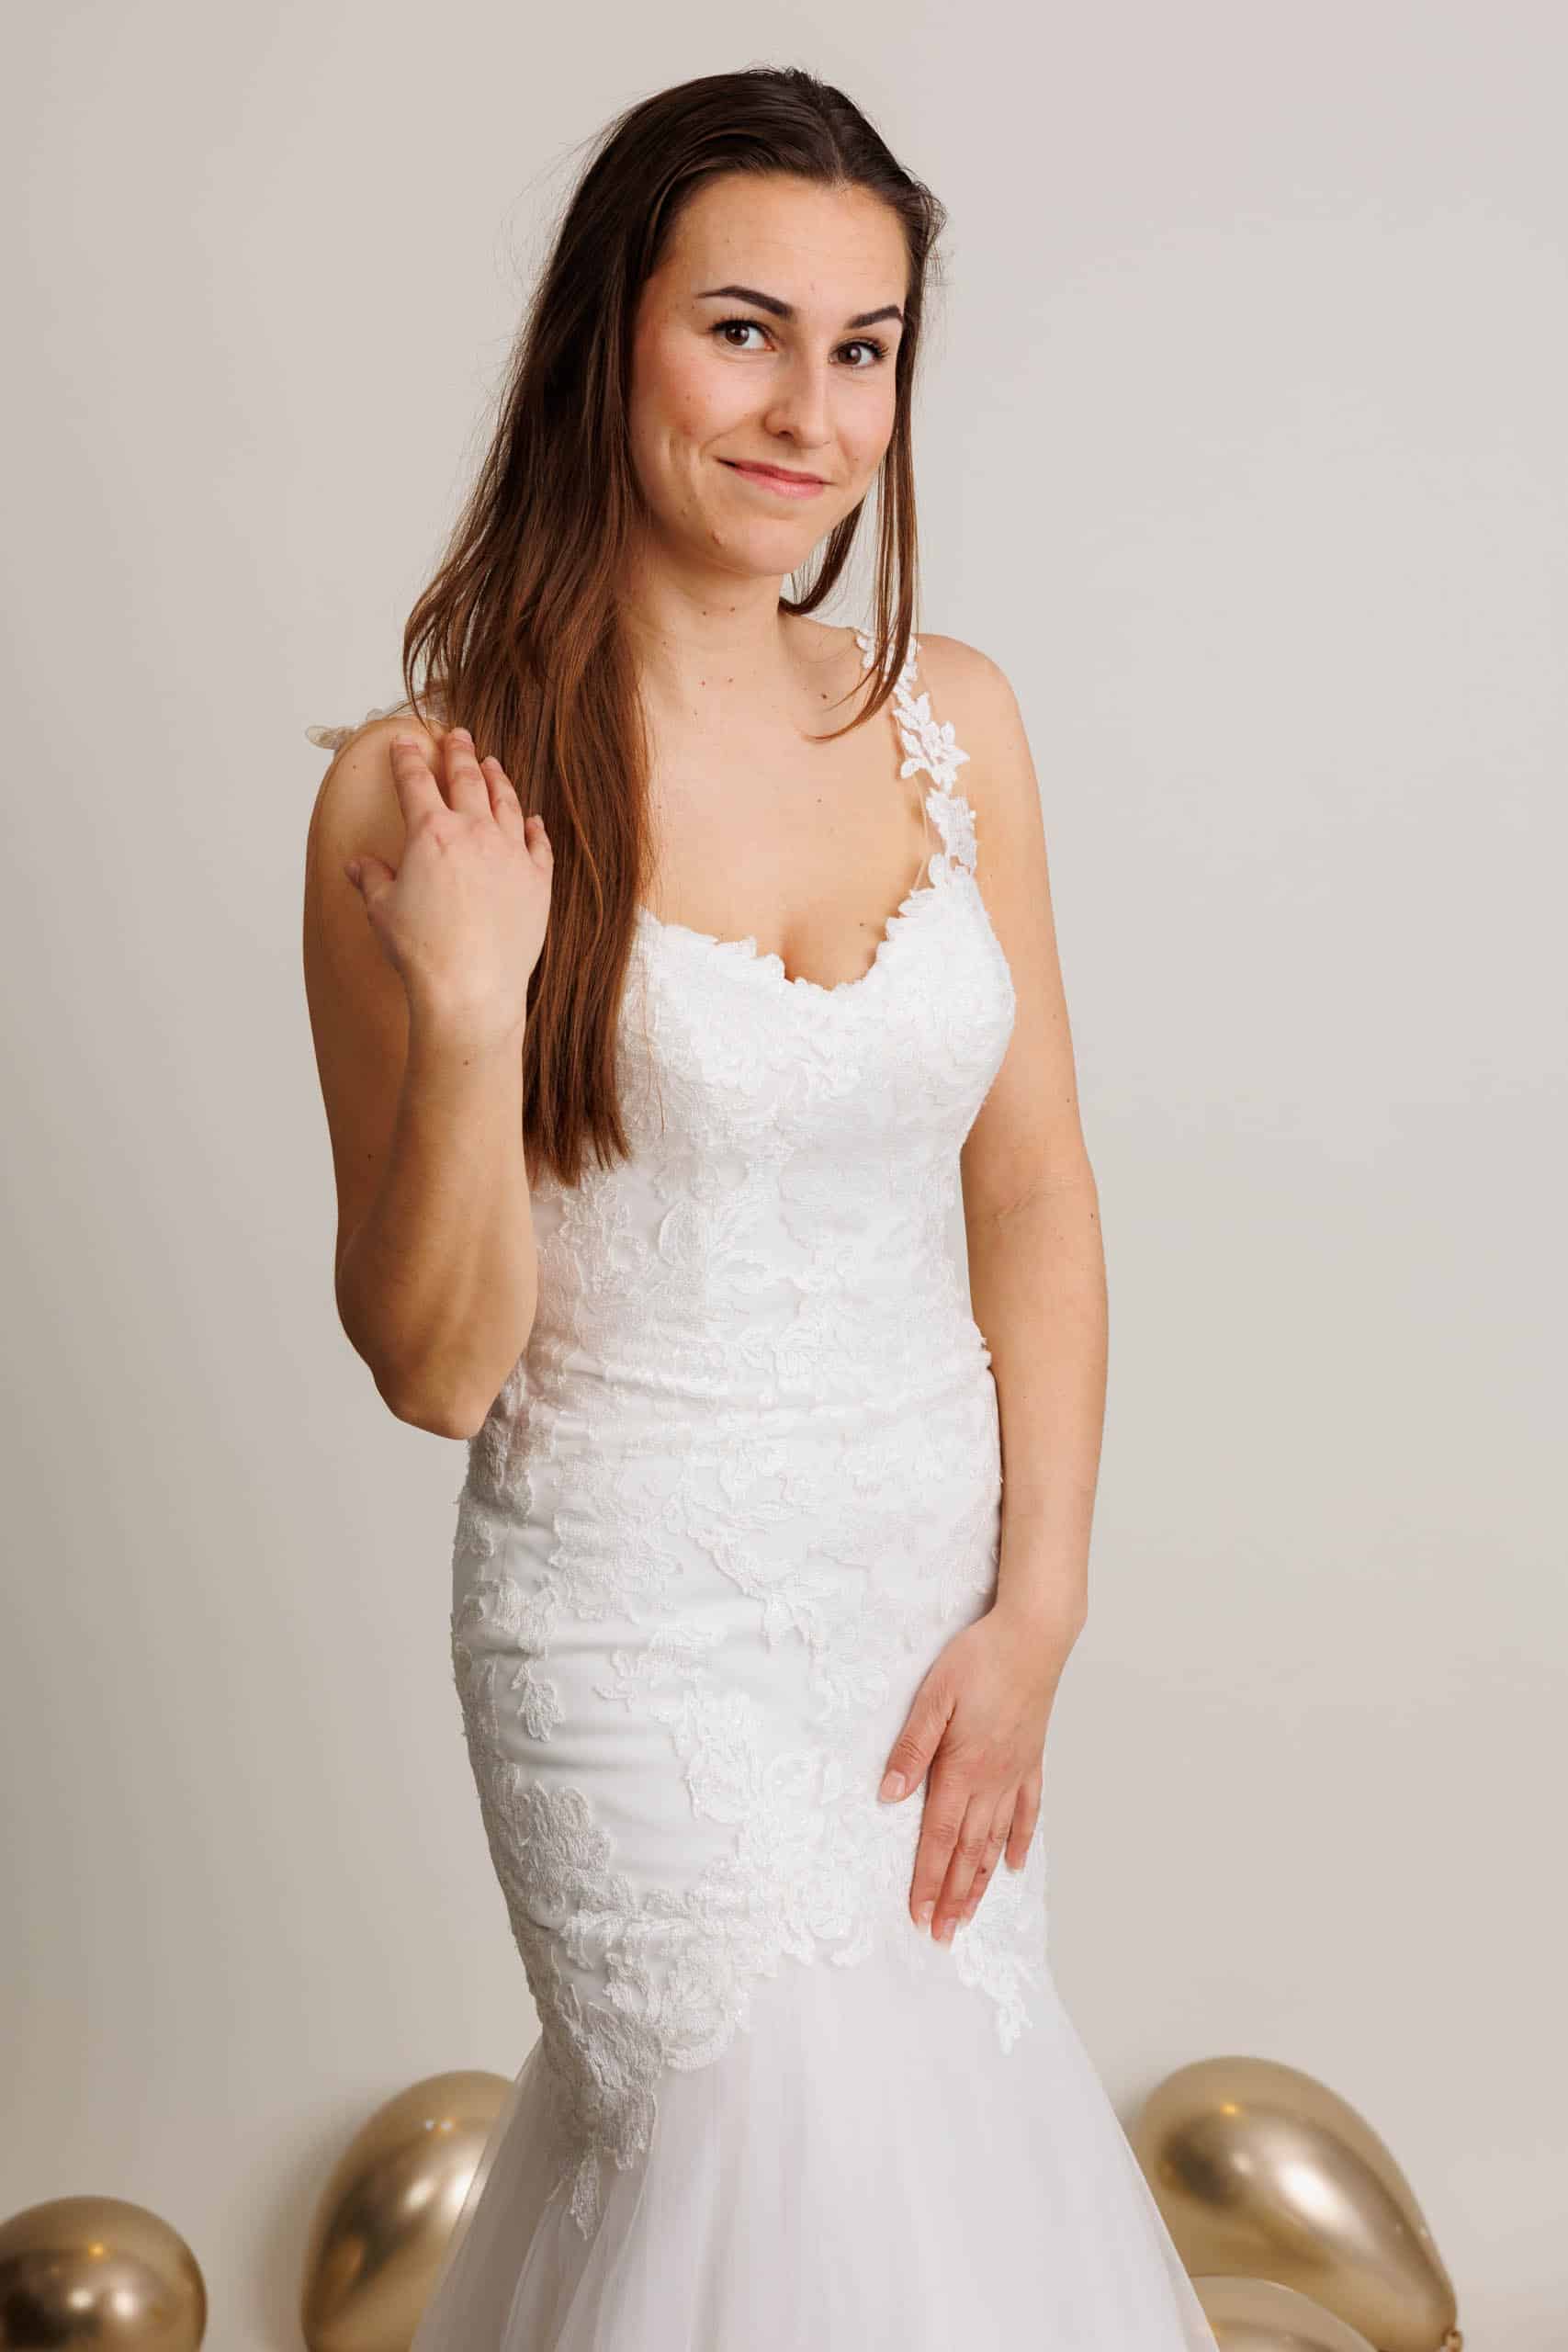 A beautiful woman in a wedding dress poses for a photo while trying on wedding dresses for fun.